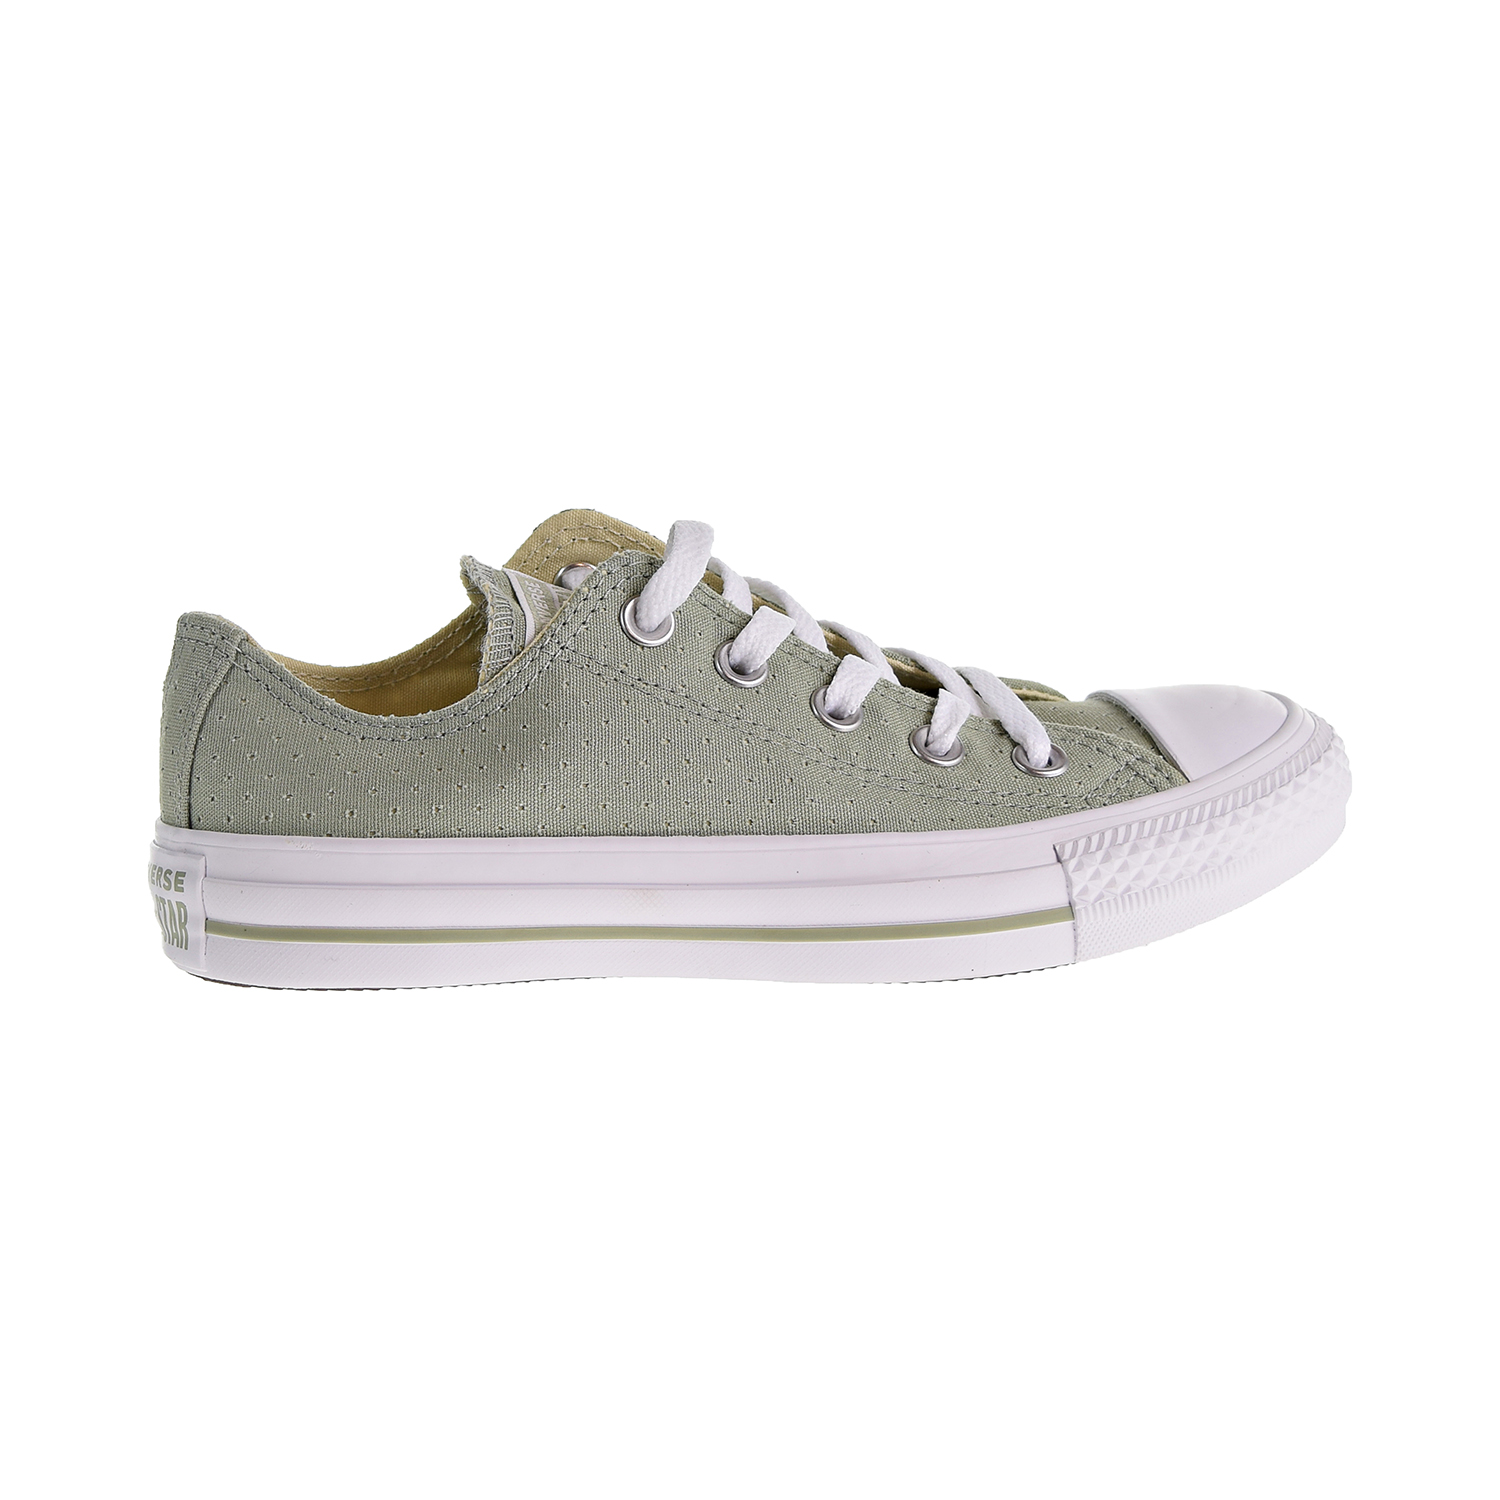 converse all star perforated leather ox